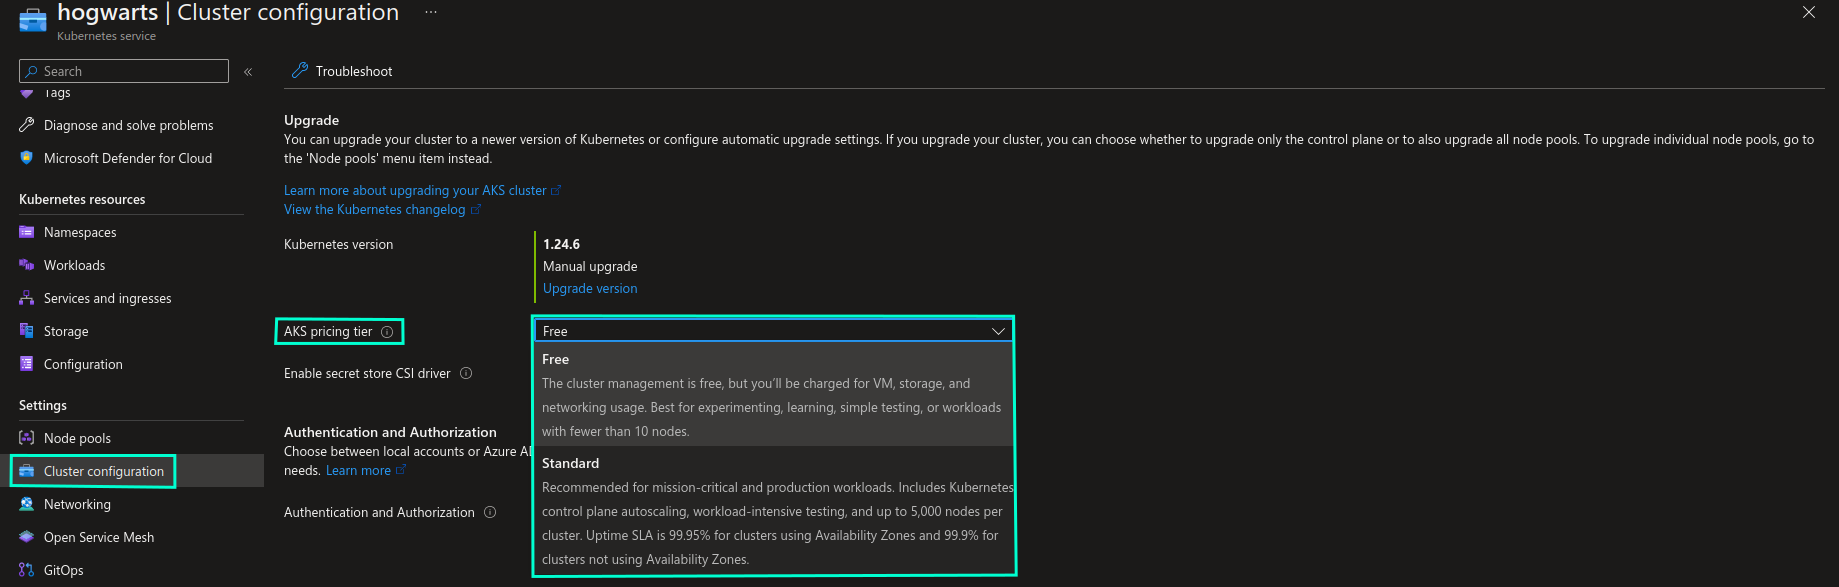 Screenshot of how to enable Uptime SLA for existing AKS cluster from Cluster configuration section in Azure Portal